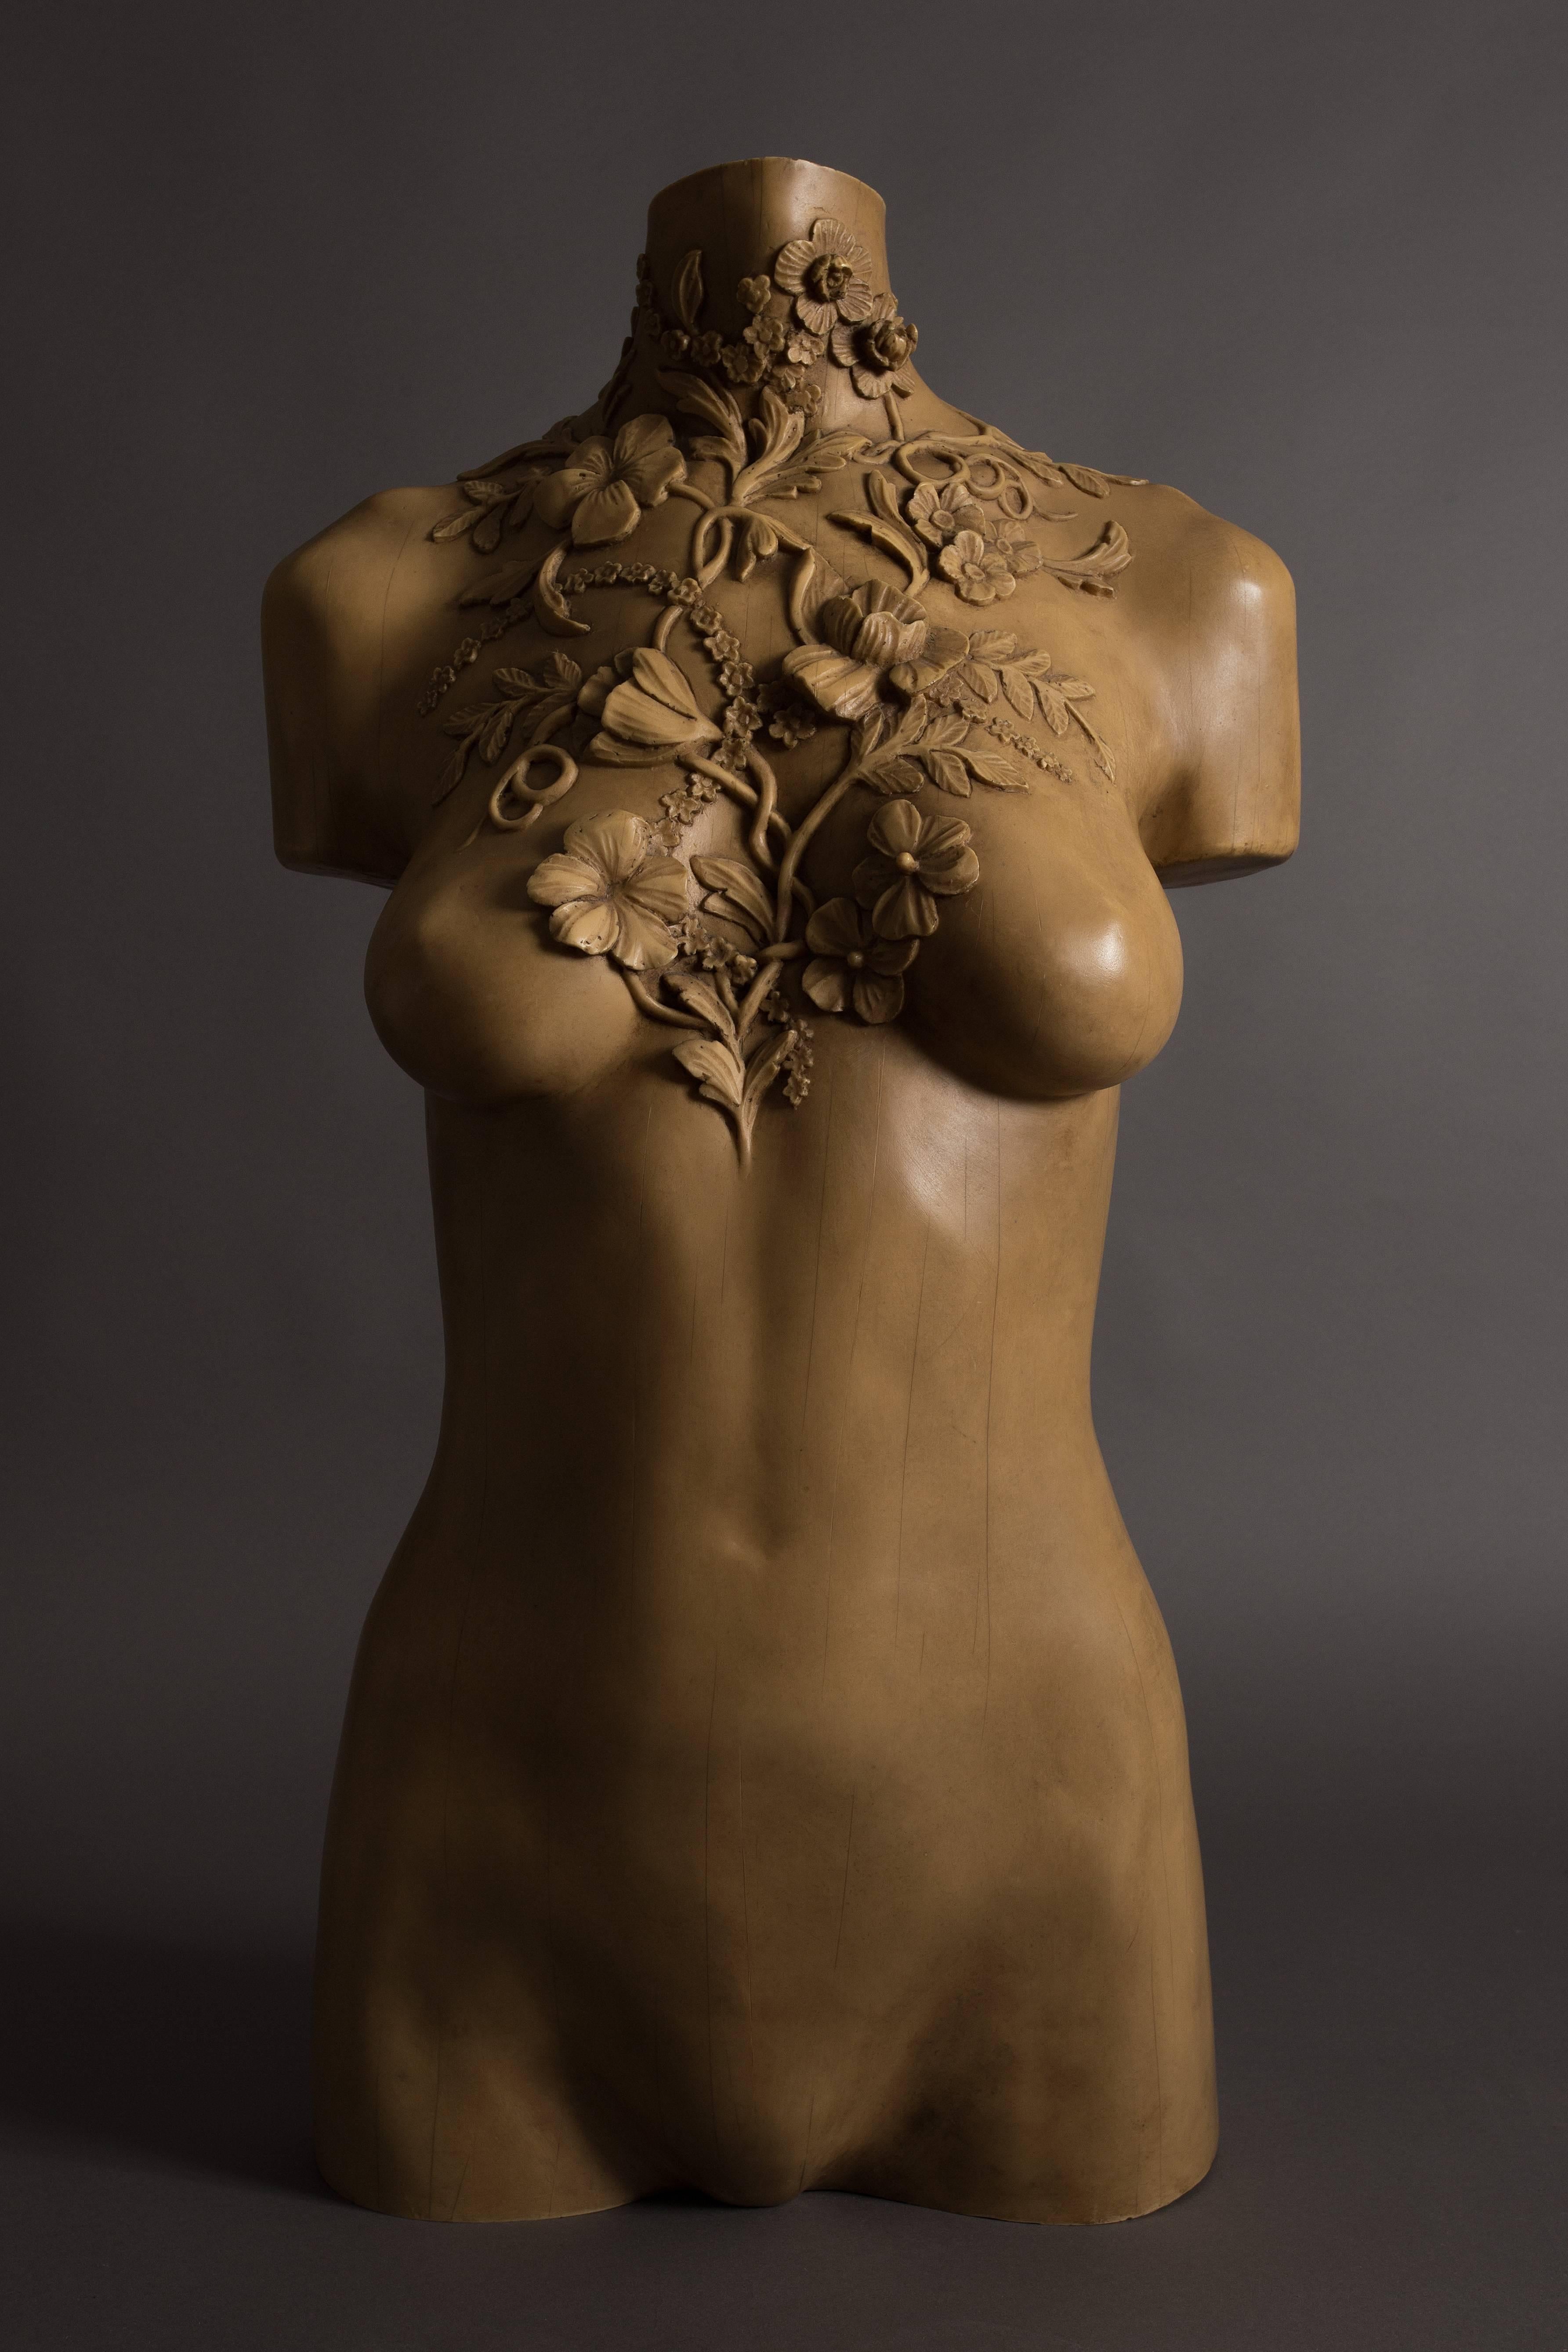 Alexander McQueen bust of Laura Morgan made in 2001, used as a decorative mannequin in the Alexander McQueen store at 47 Conduit Street, London. 

McQueen commissioned woodcarver Paul Ferguson to create two identical busts based on a mould of the